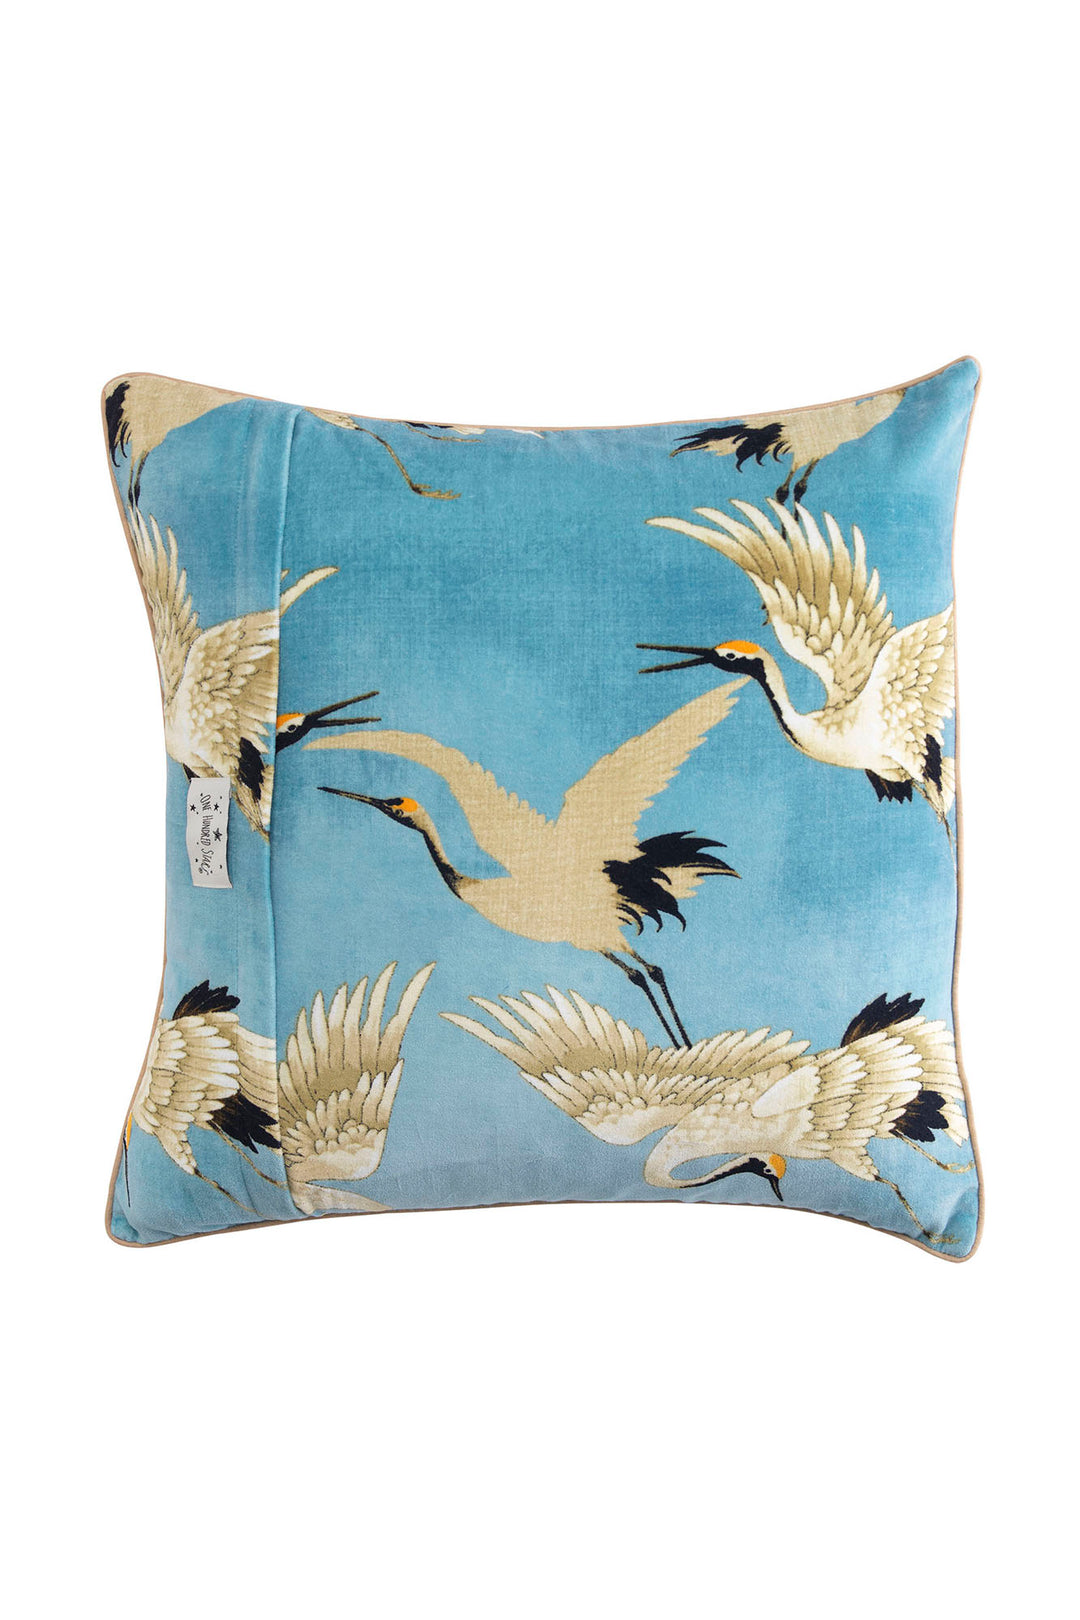 One Hundred Stars Stork Crane Sky Blue Square Velvet Cushion - Storks and cranes have been a major art deco trend in both fashion and interiors and this Stork Sky Square Velvet Cushion is perfect for anyone looking for something chic, stylish and in vogue!